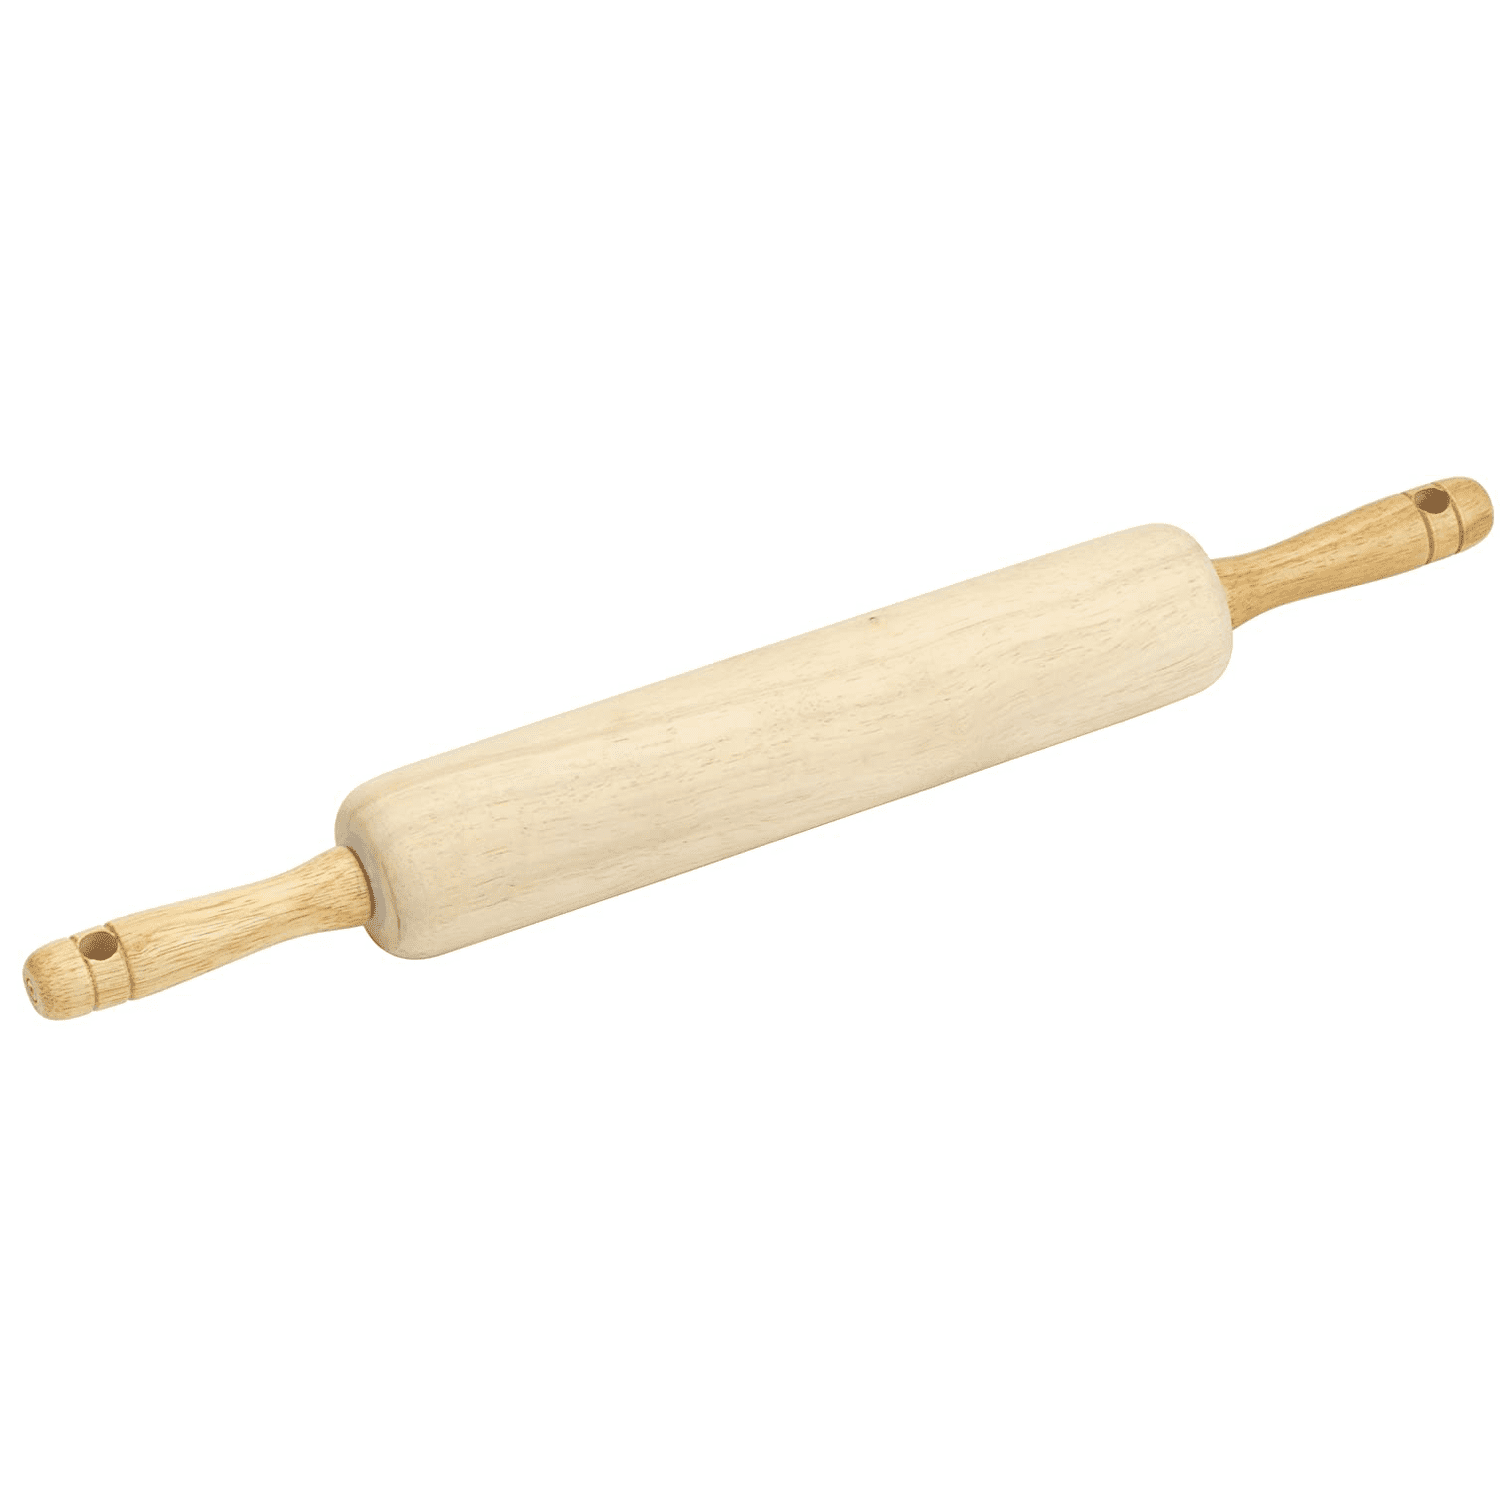 Good Cook Classic Wood Rolling Pin